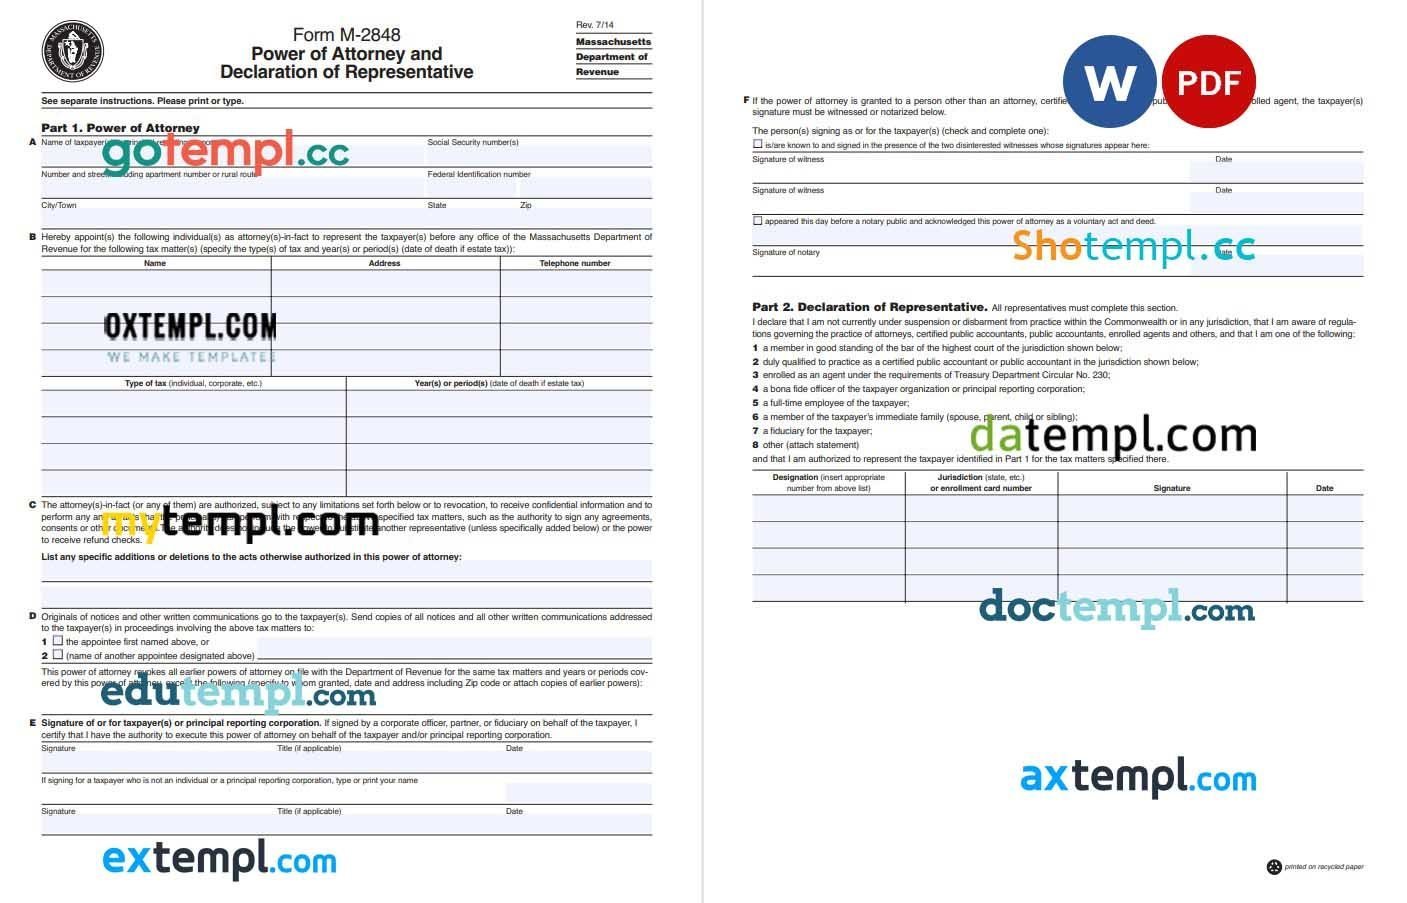 Massachusetts Tax Power of Attorney Form example, fully editable